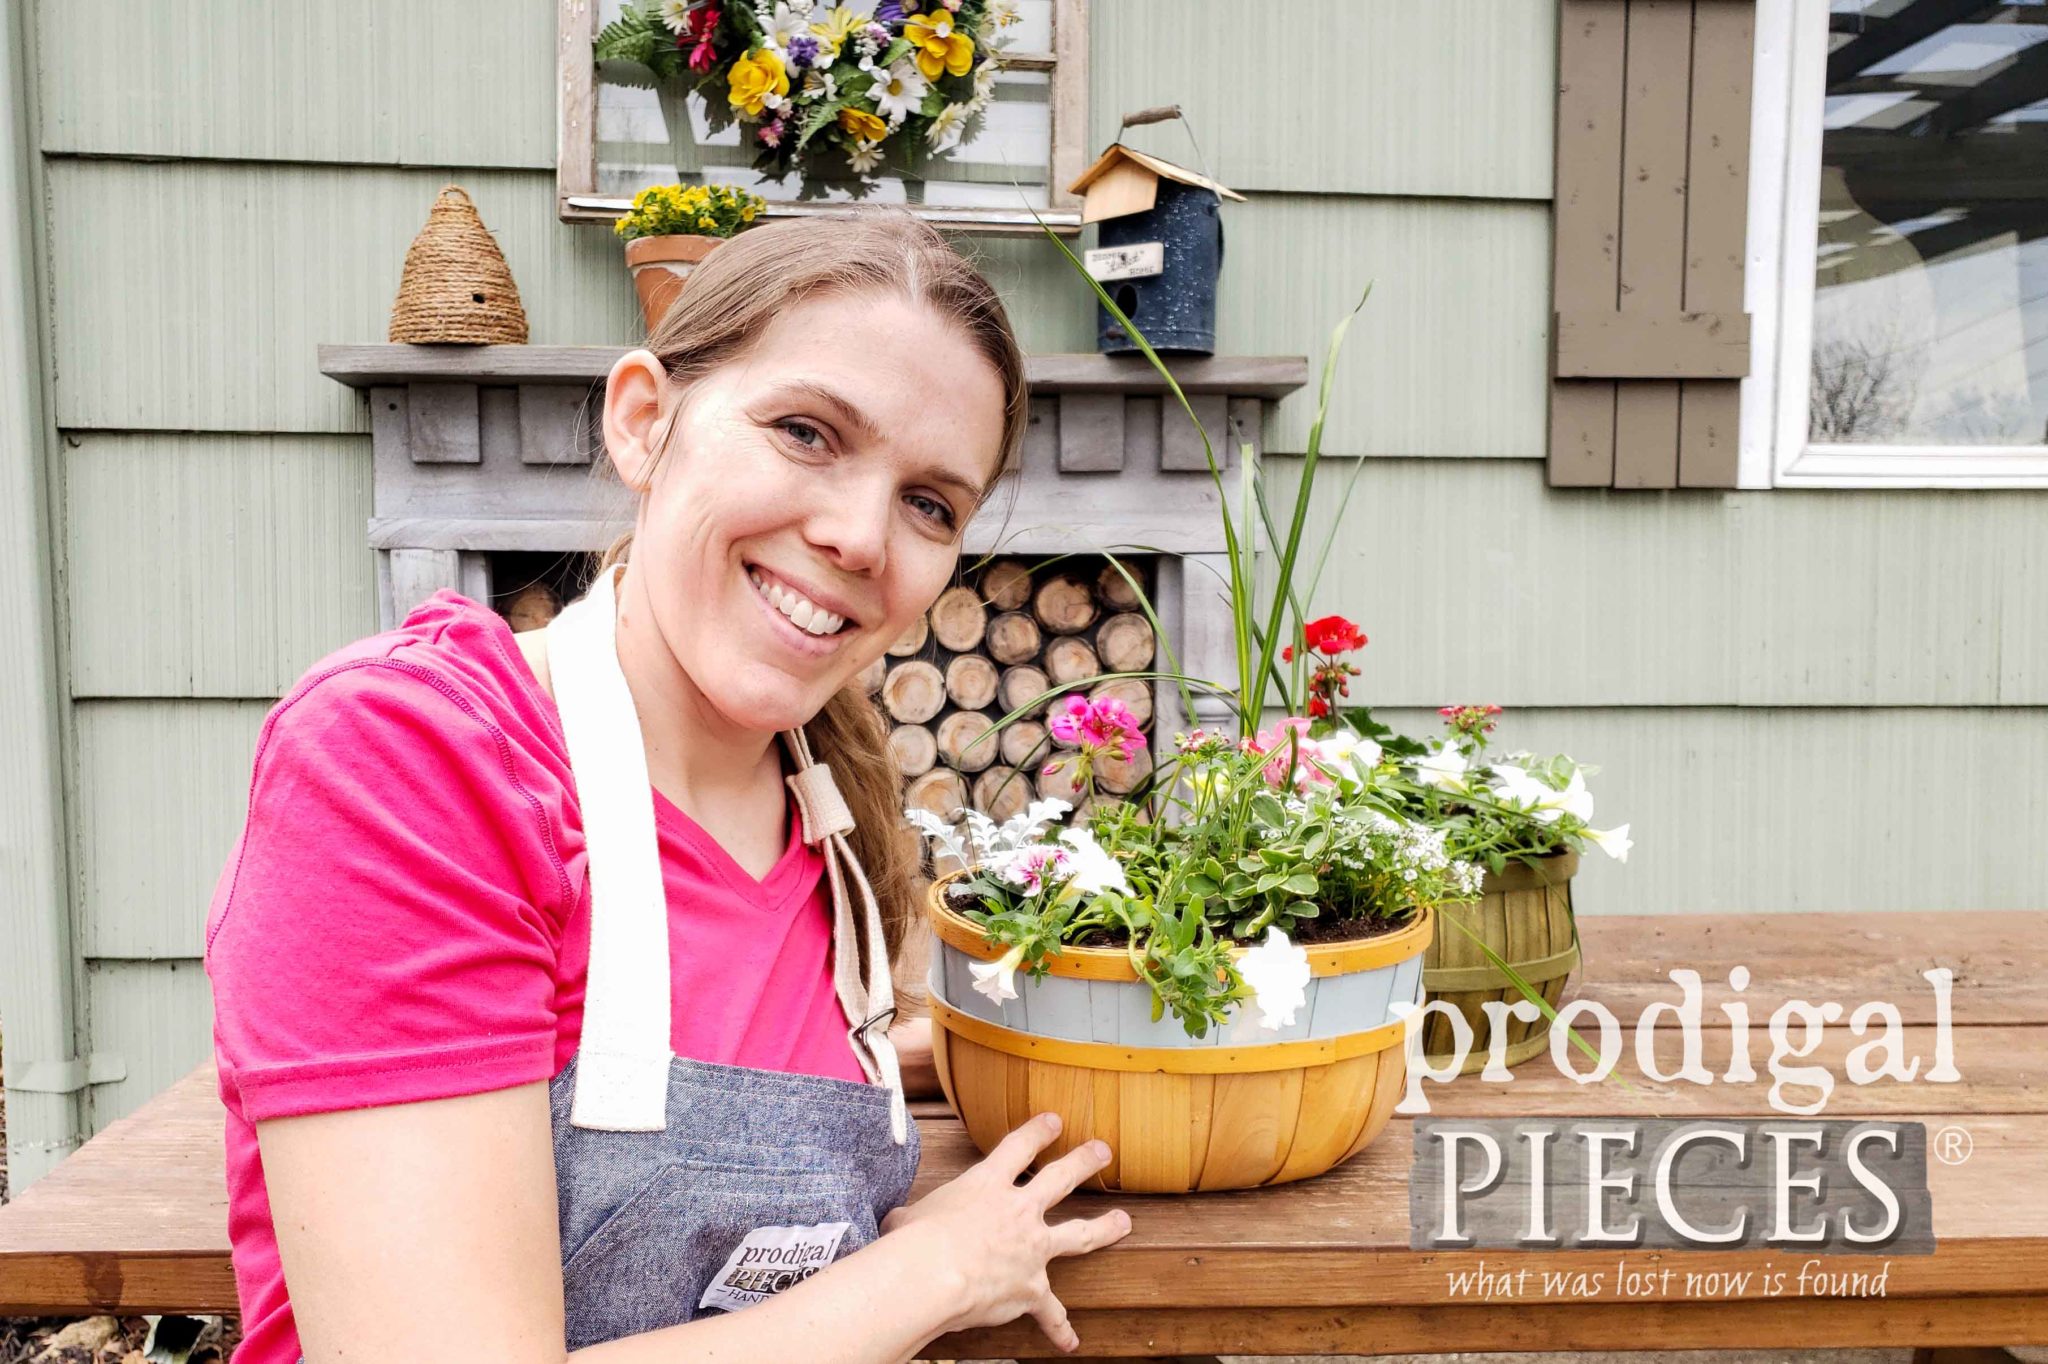 Join Larissa of Prodigal Pieces as she shows you how to make this easy & affordable Mother's Day Flower Basket | Give the gift of blooms! | Video Tutorial at prodigalpieces.com #prodigalpieces #diy #mothersday #giftideas #flowers #garden #home #diy